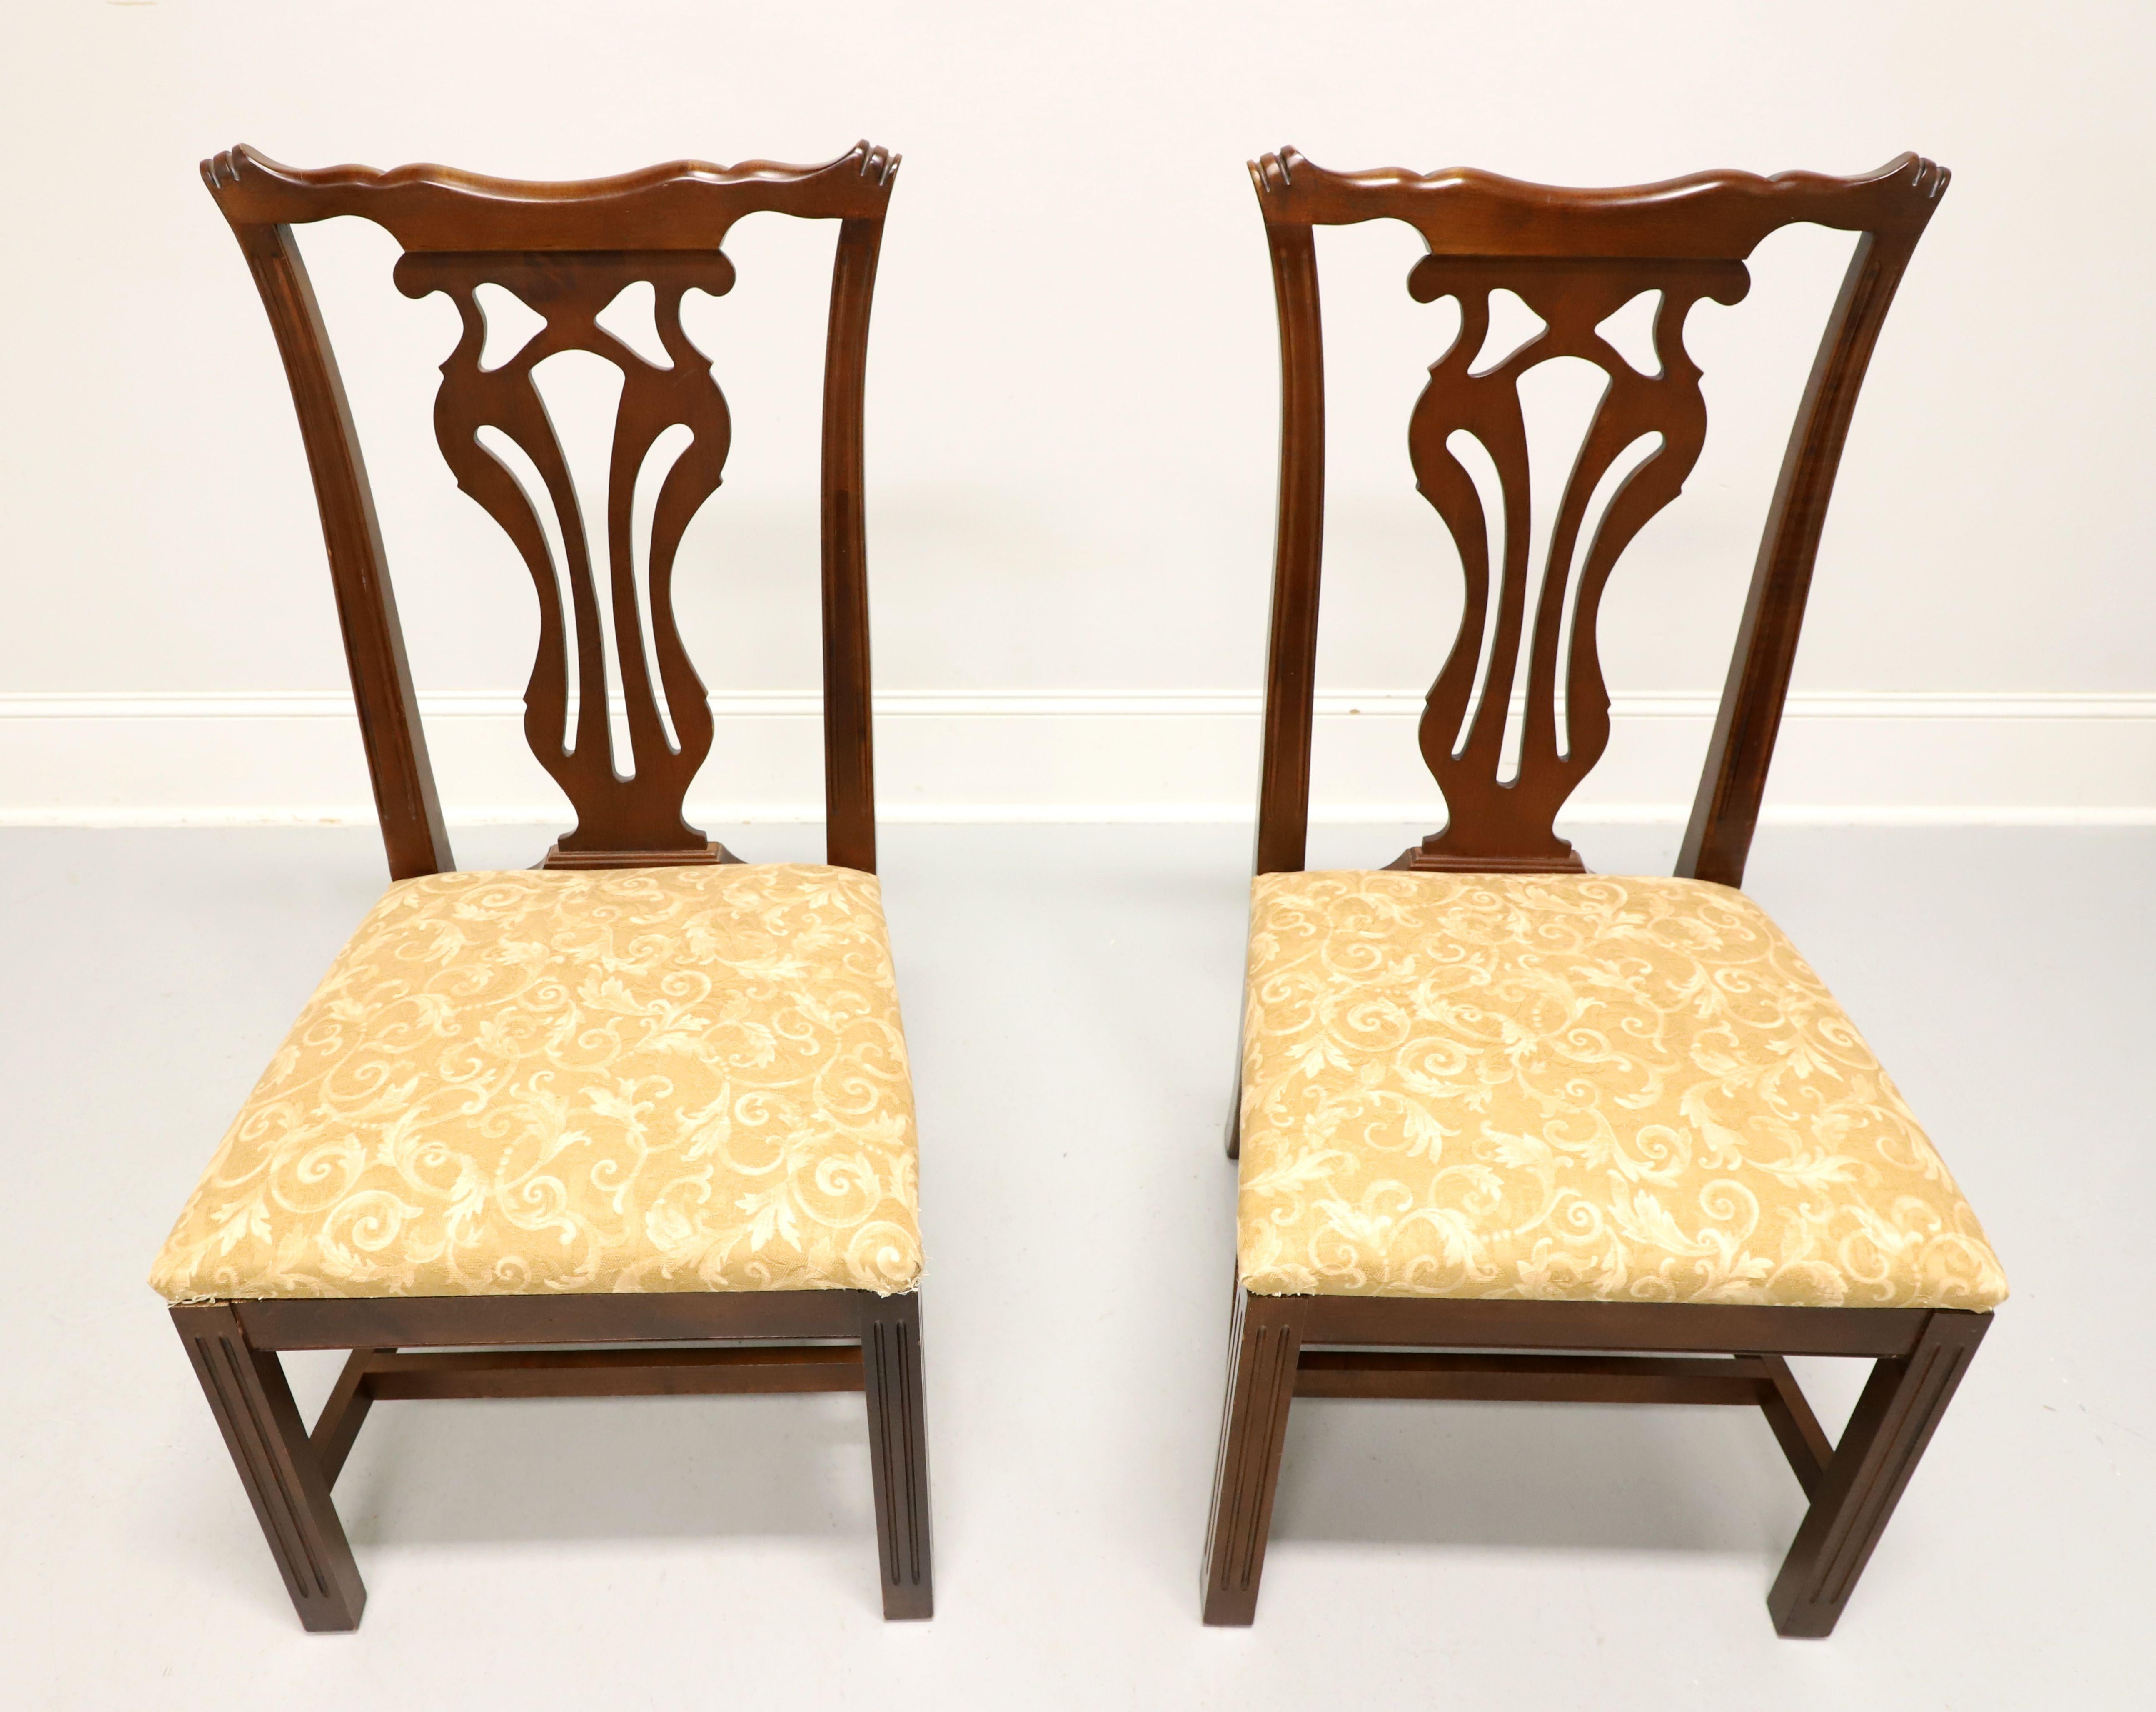 A pair of dining side chairs in the Chippendale style by Knob Creek. Mahogany with carved backrests, gold brocade fabric upholstered seat, stretcher base, and straight legs. Made in the USA, in the late 20th Century.

Measures:  Overall: 20w 22d